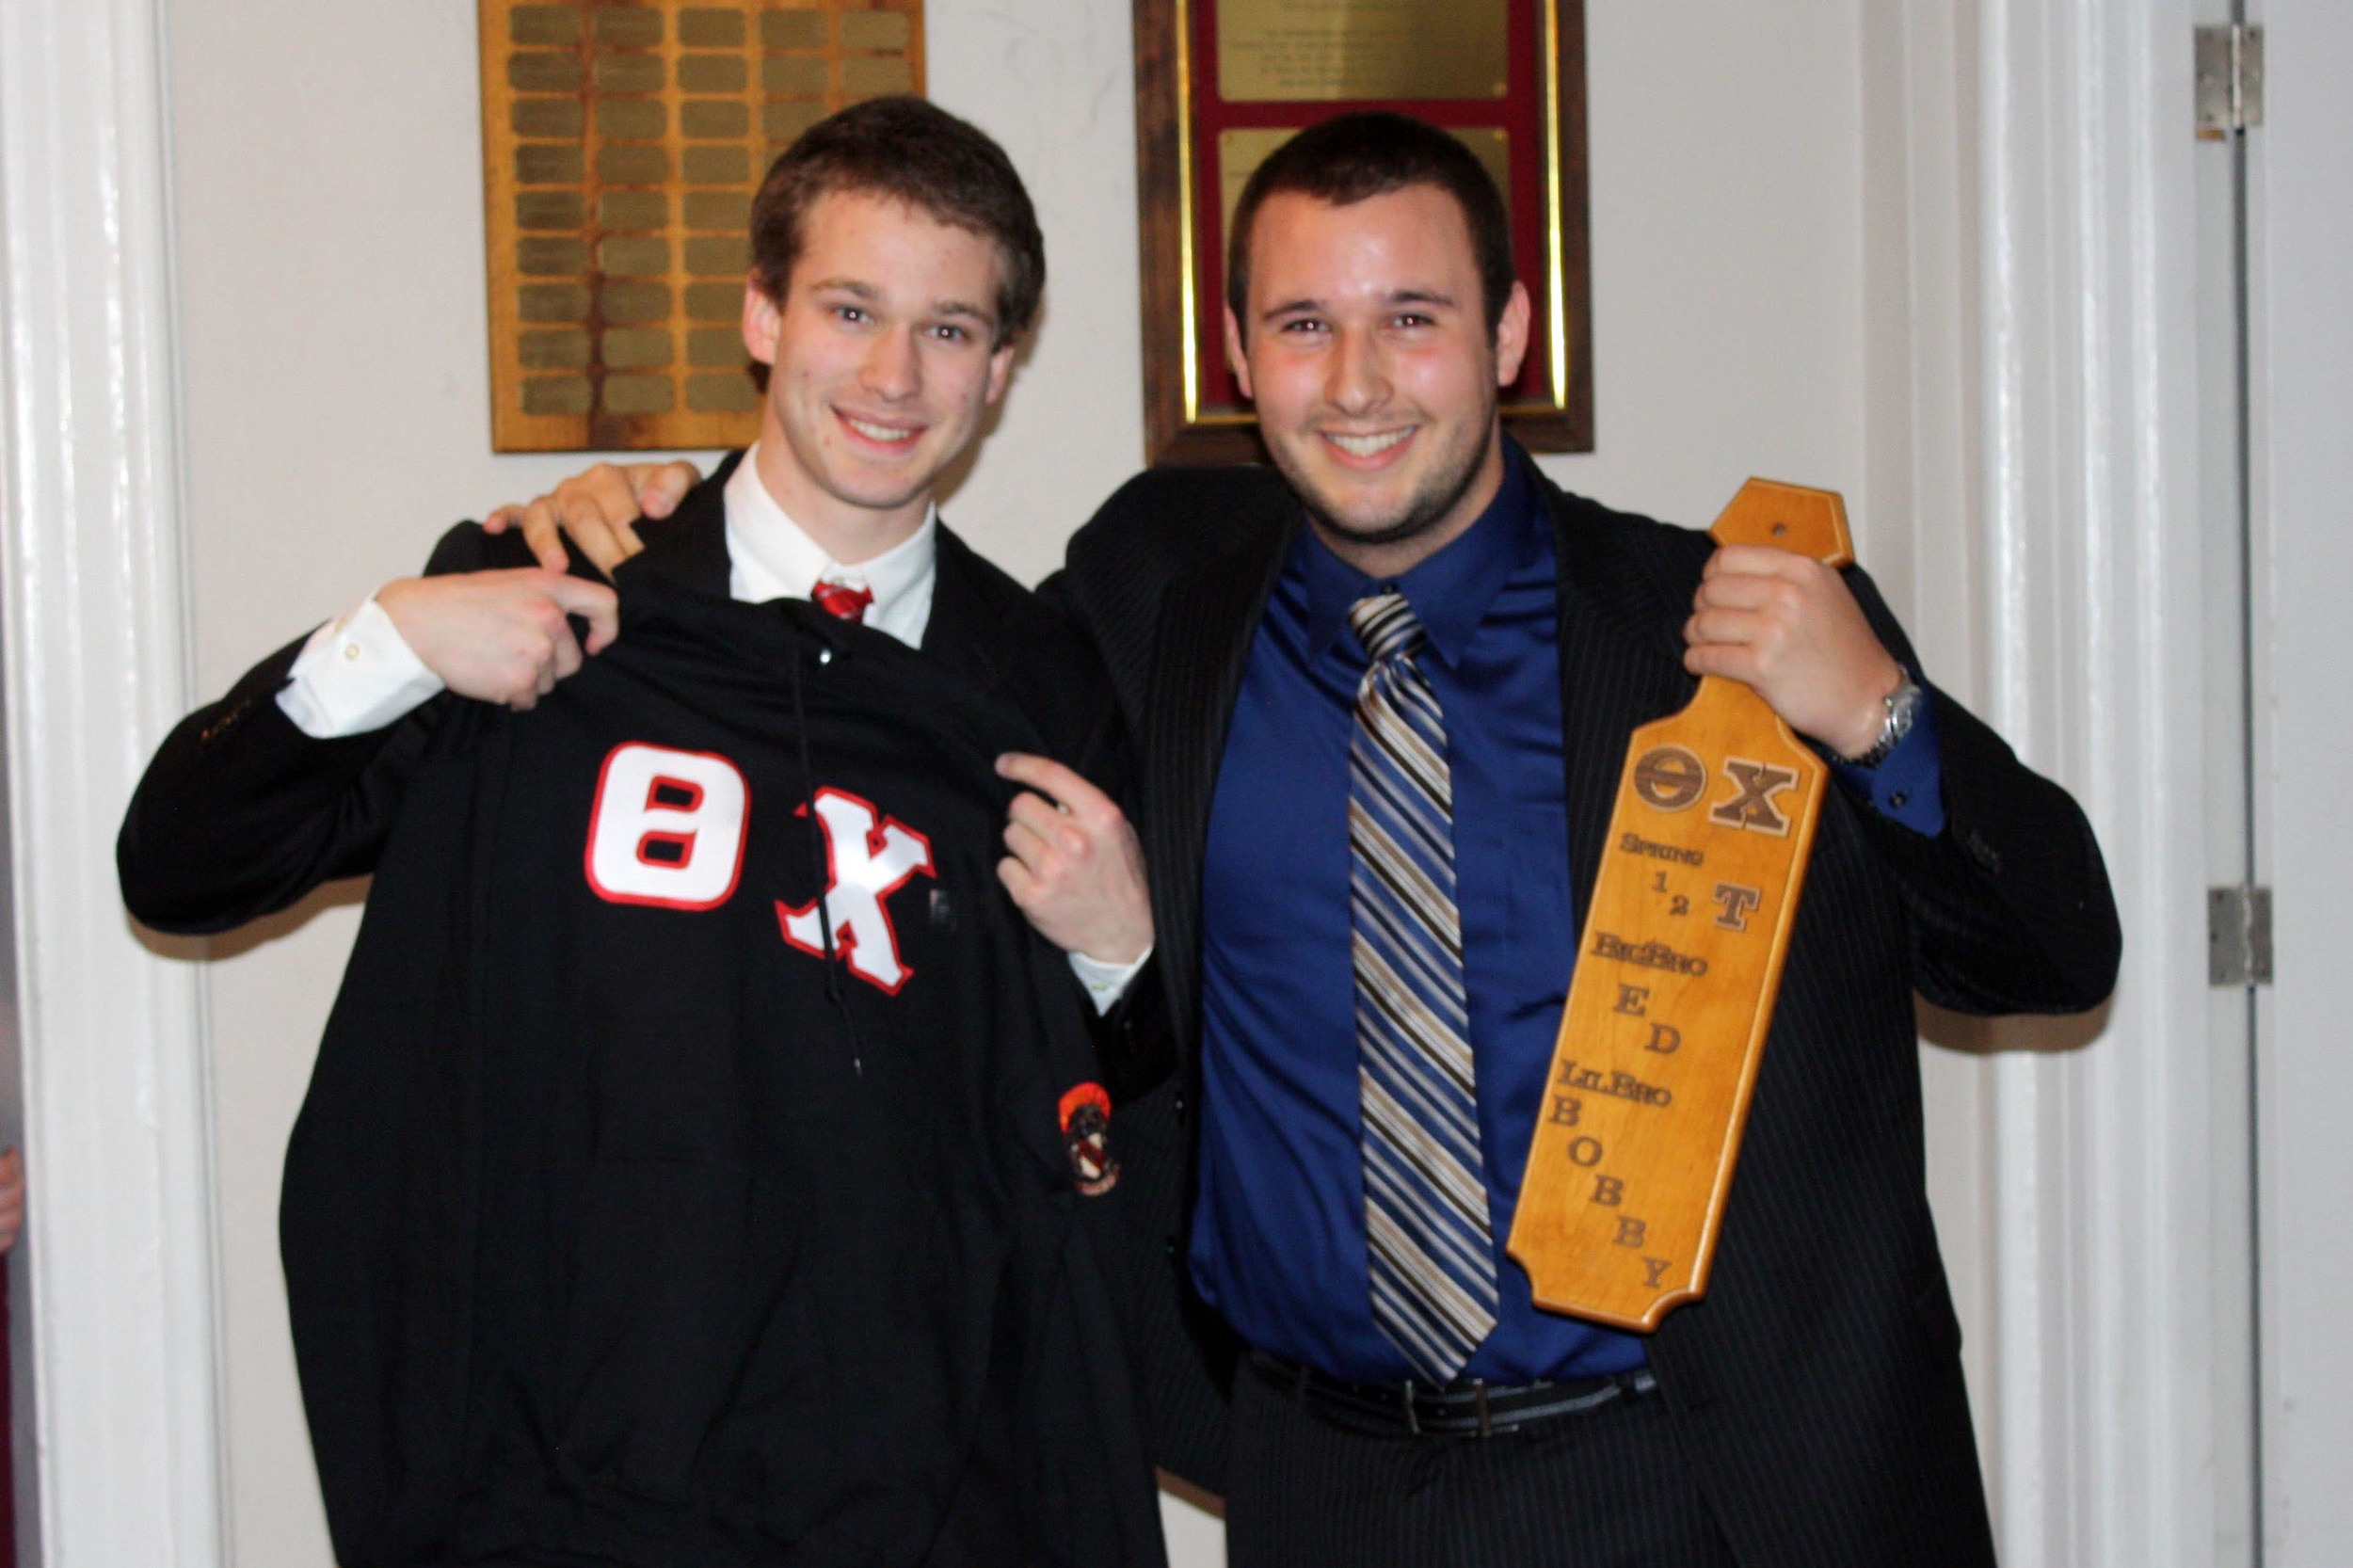  Little Brother Bobby Aichele (L) and Big Brother Ed Wallace
Spring 2012 Initiation Night 